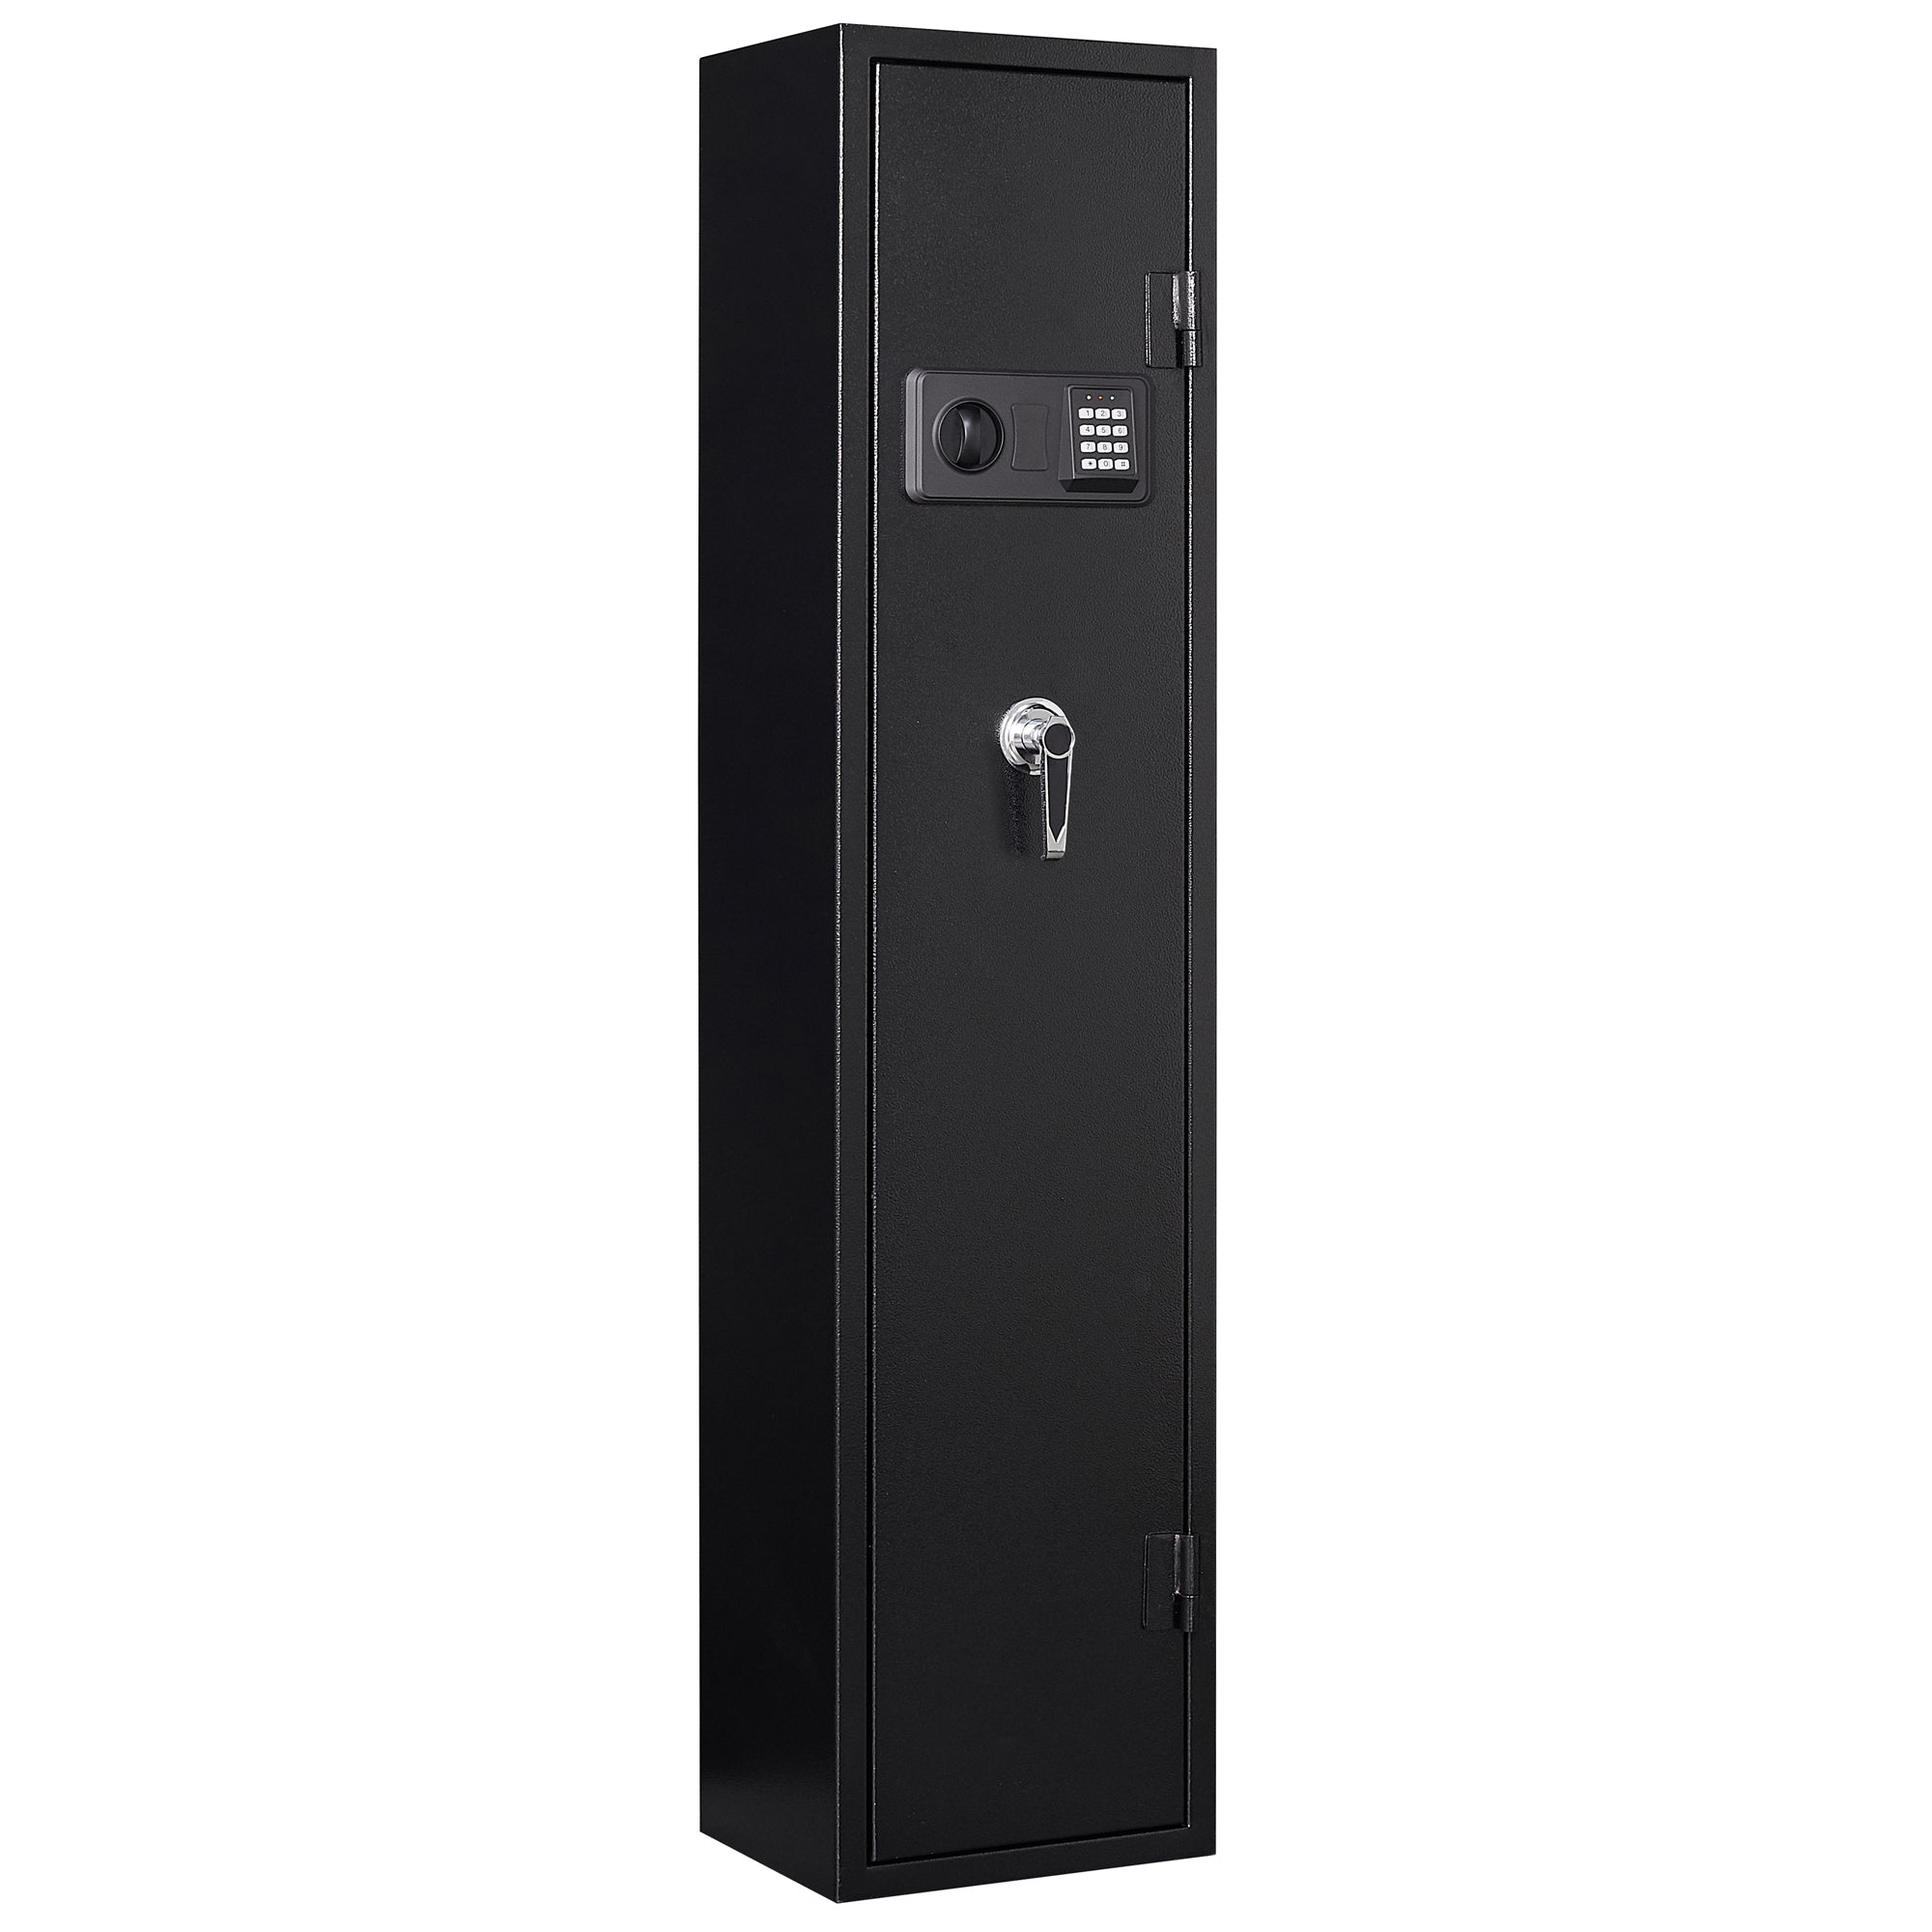 5 Gun Safe for Home Rifle and Pistols, Quick Access black-steel